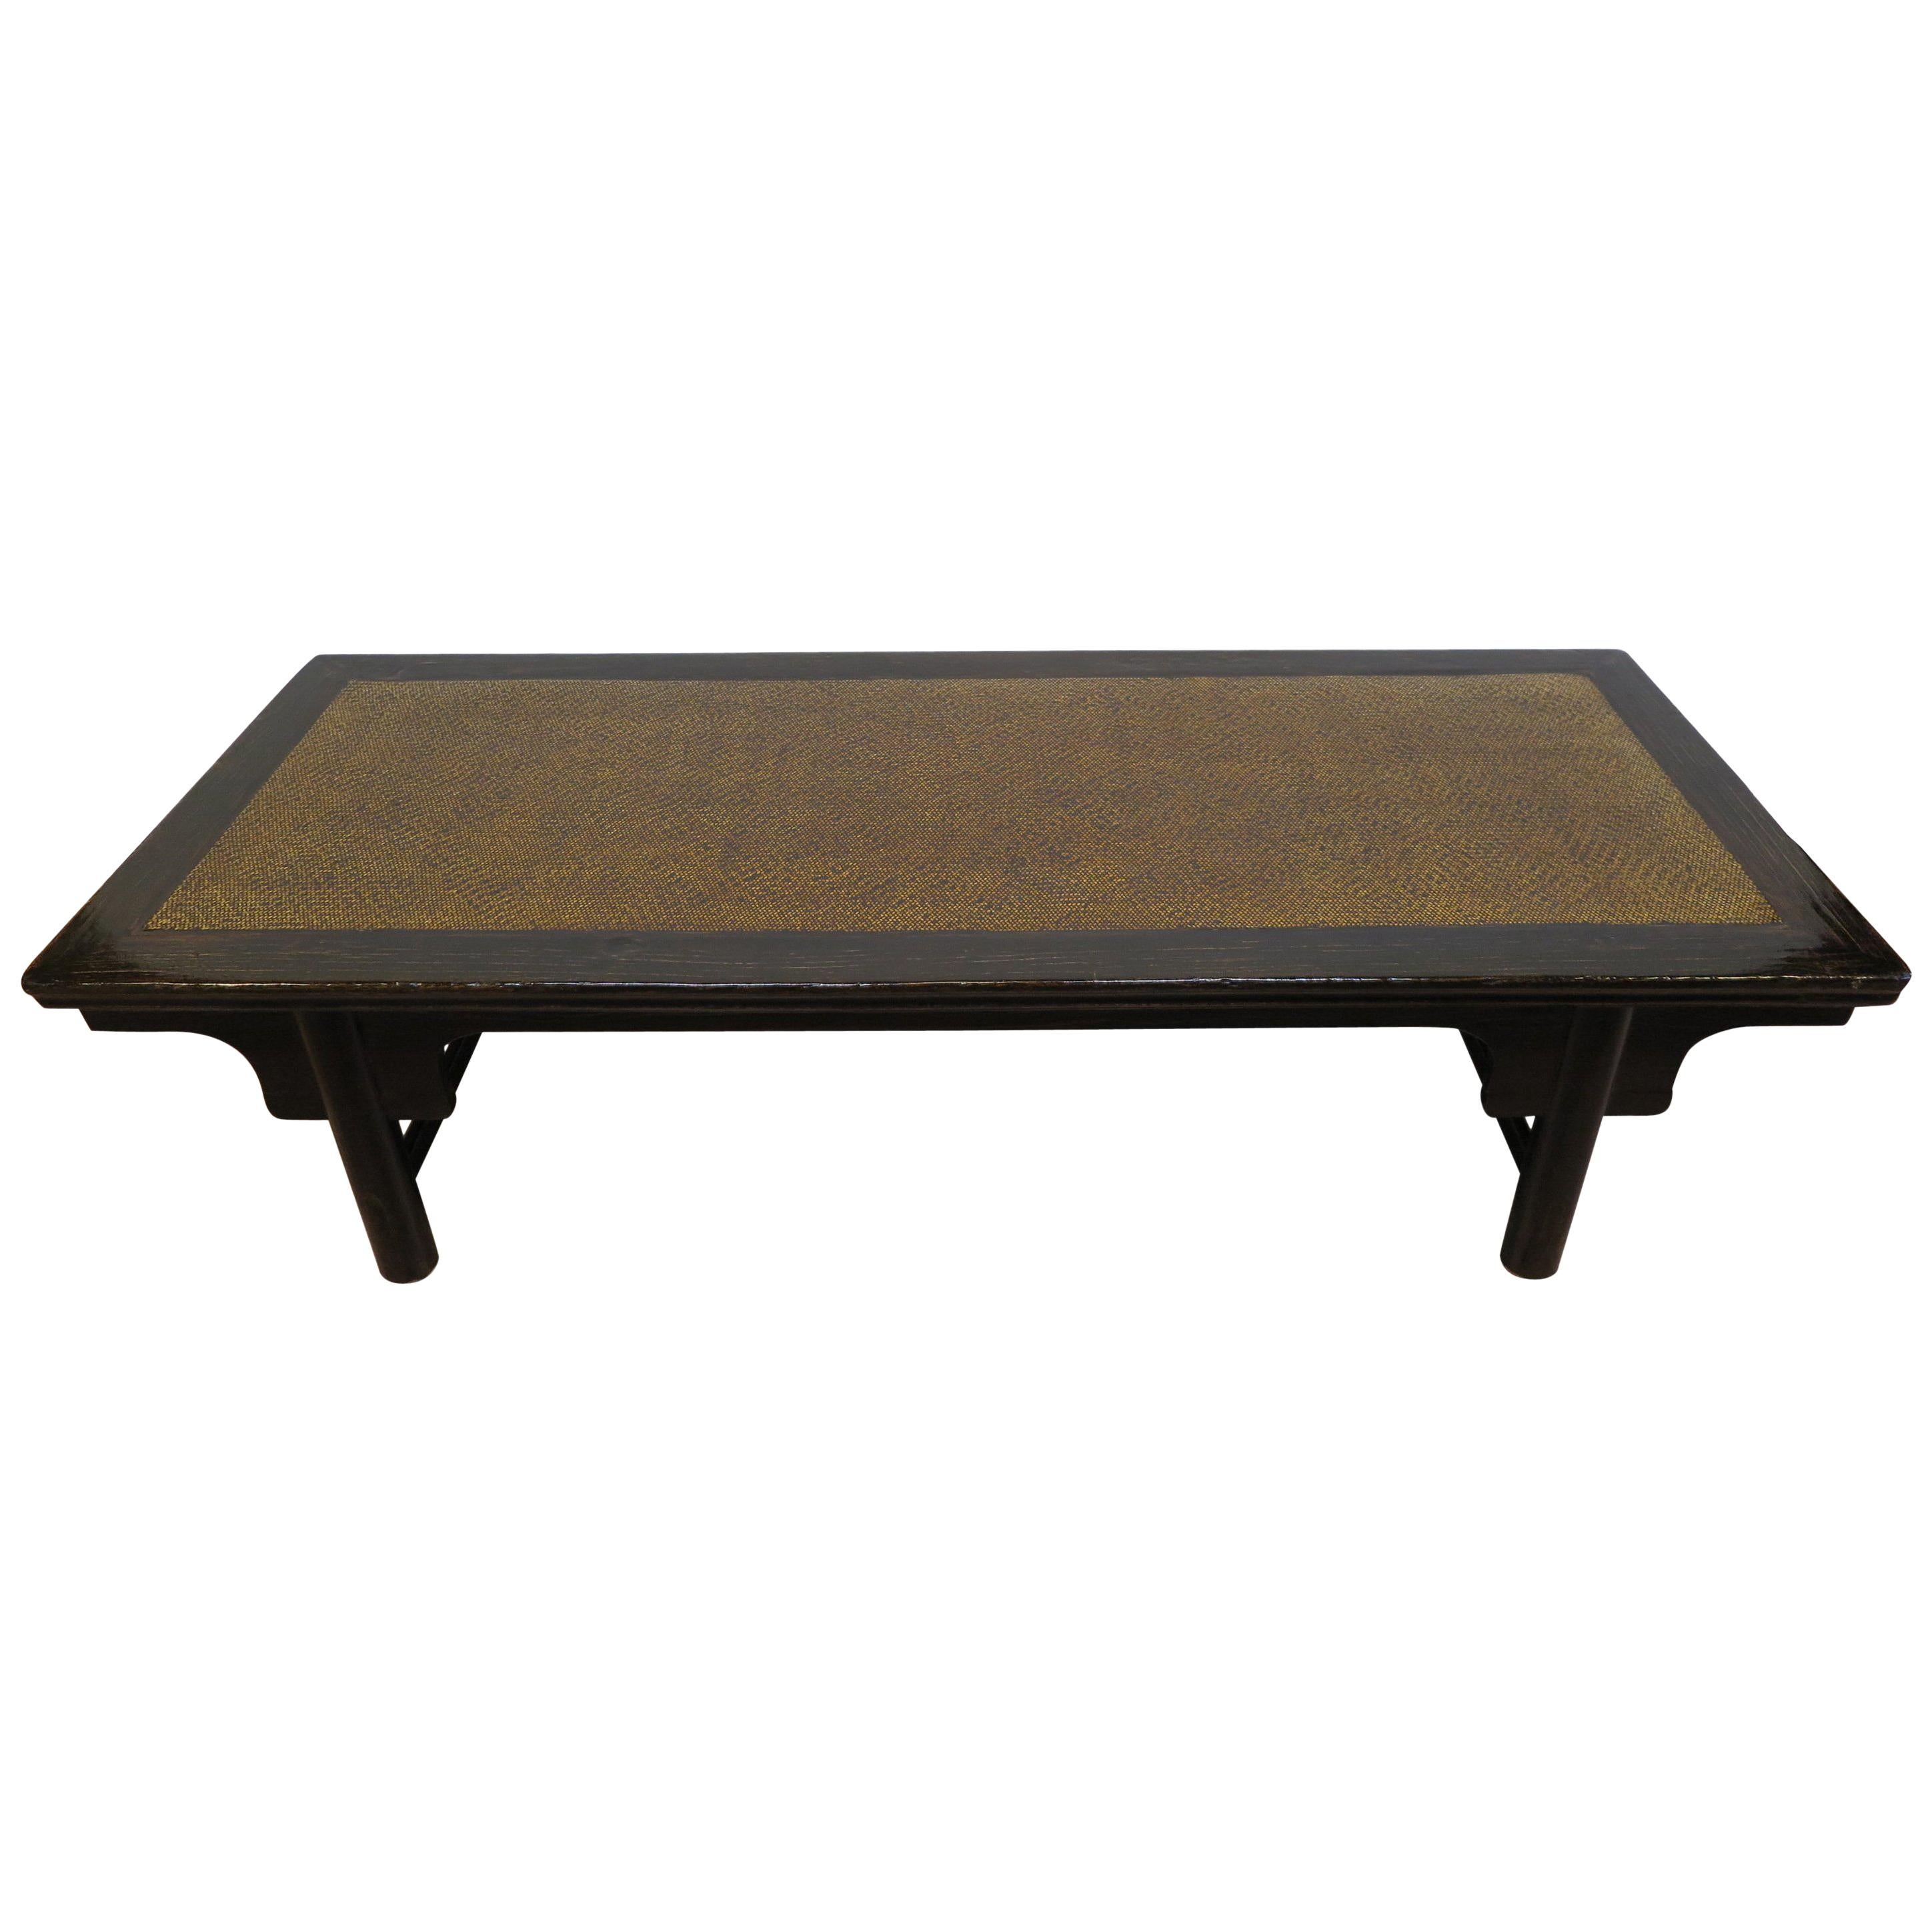 19th Century Chinese Low Table